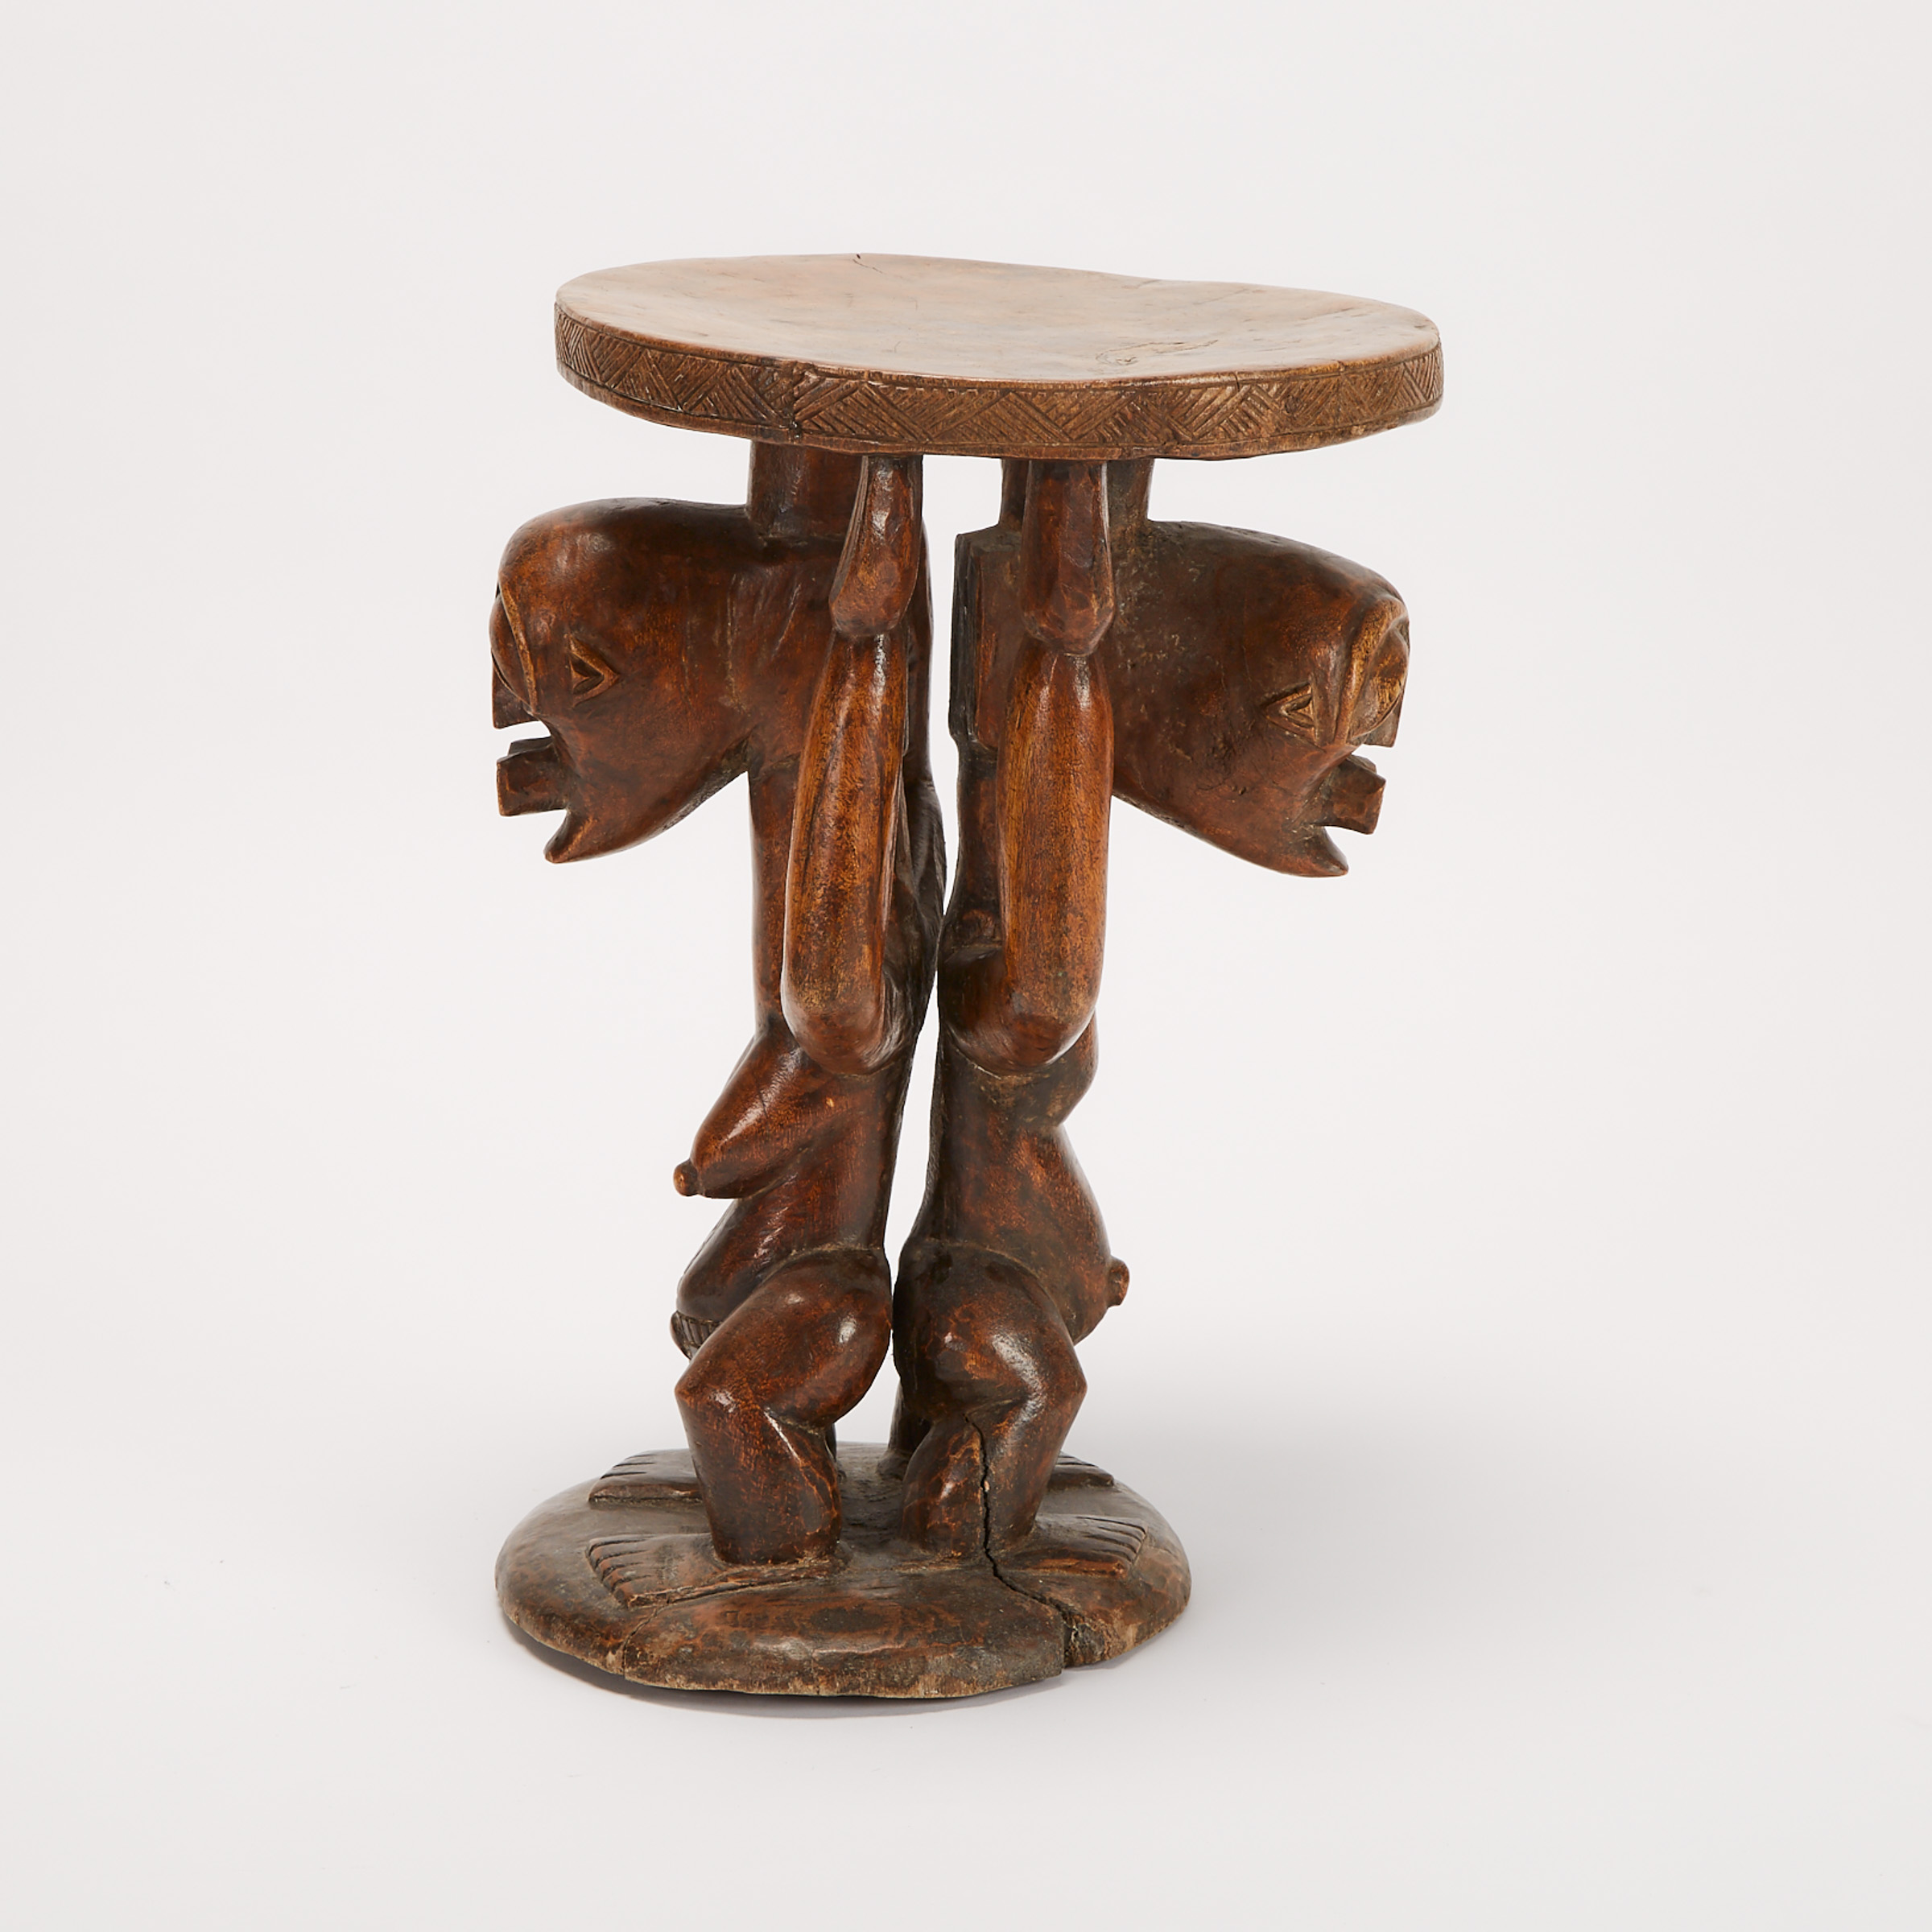 Songye Carved Wood Figural Stool, Democratic Republic of Congo, Central Africa